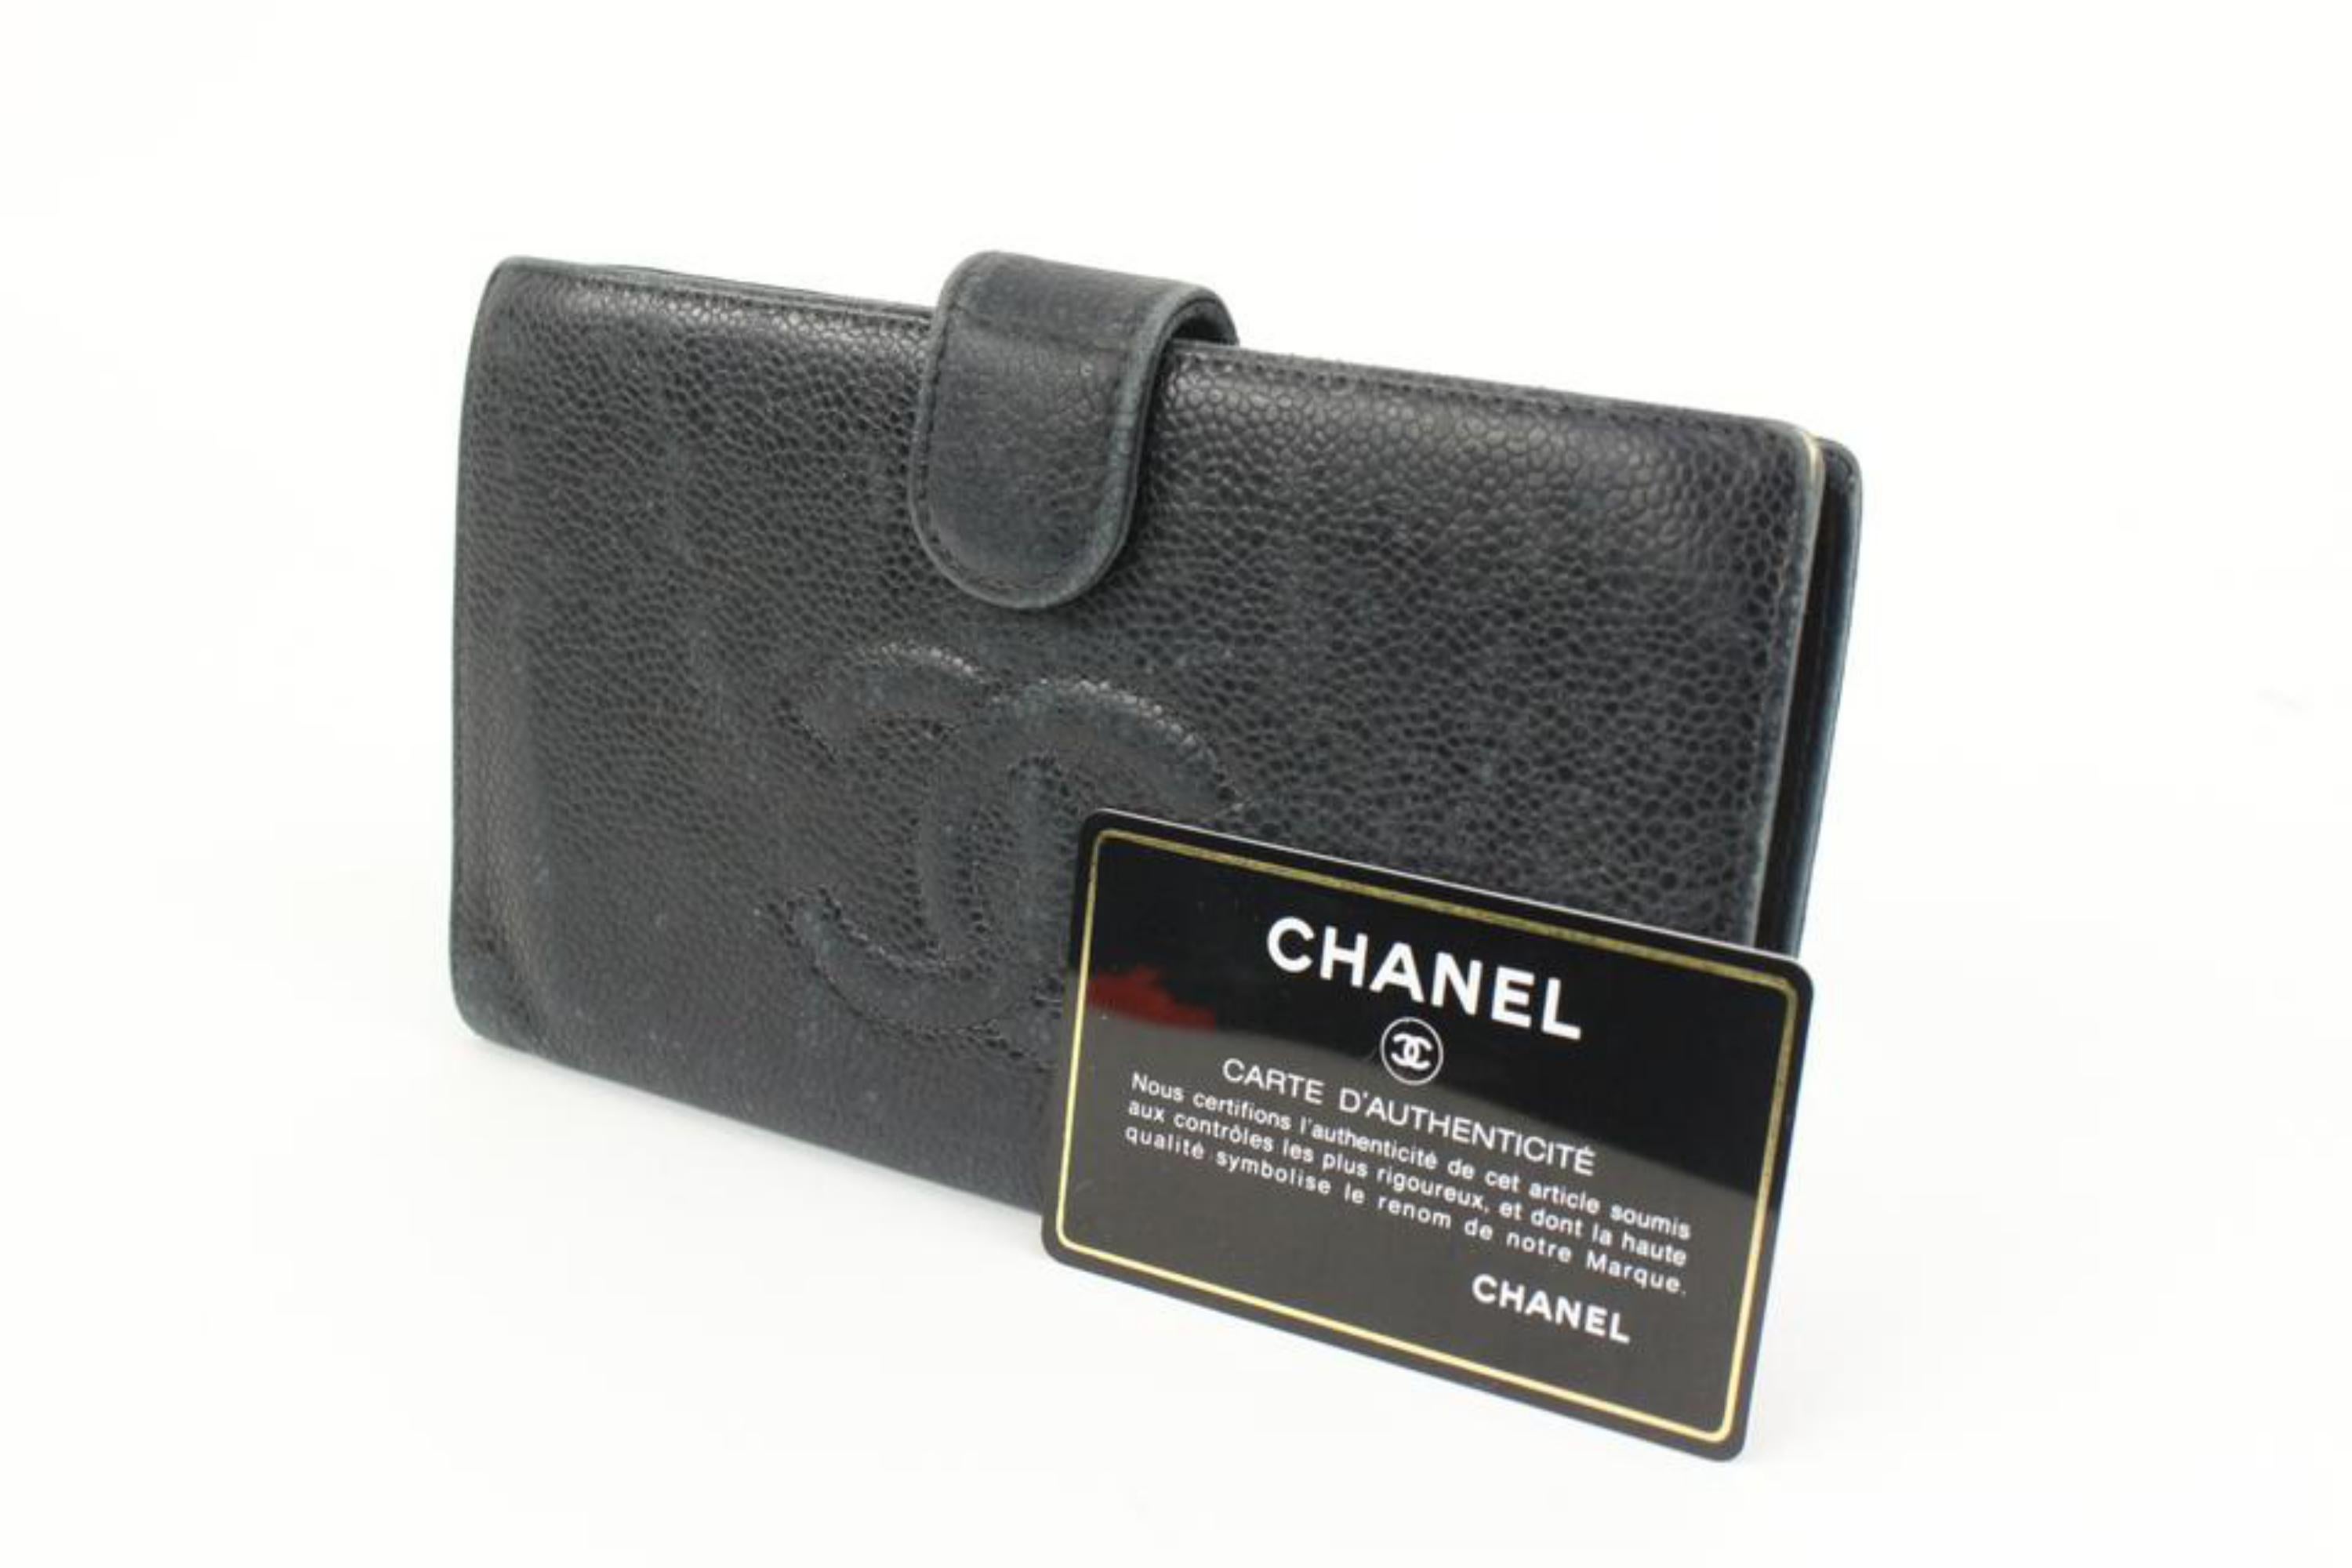 Chanel Black Caviar Leather CC Logo Long Flap Wallet 95ck323s
Date Code/Serial Number: 9474839
Made In: France
Measurements: Length:  6.8